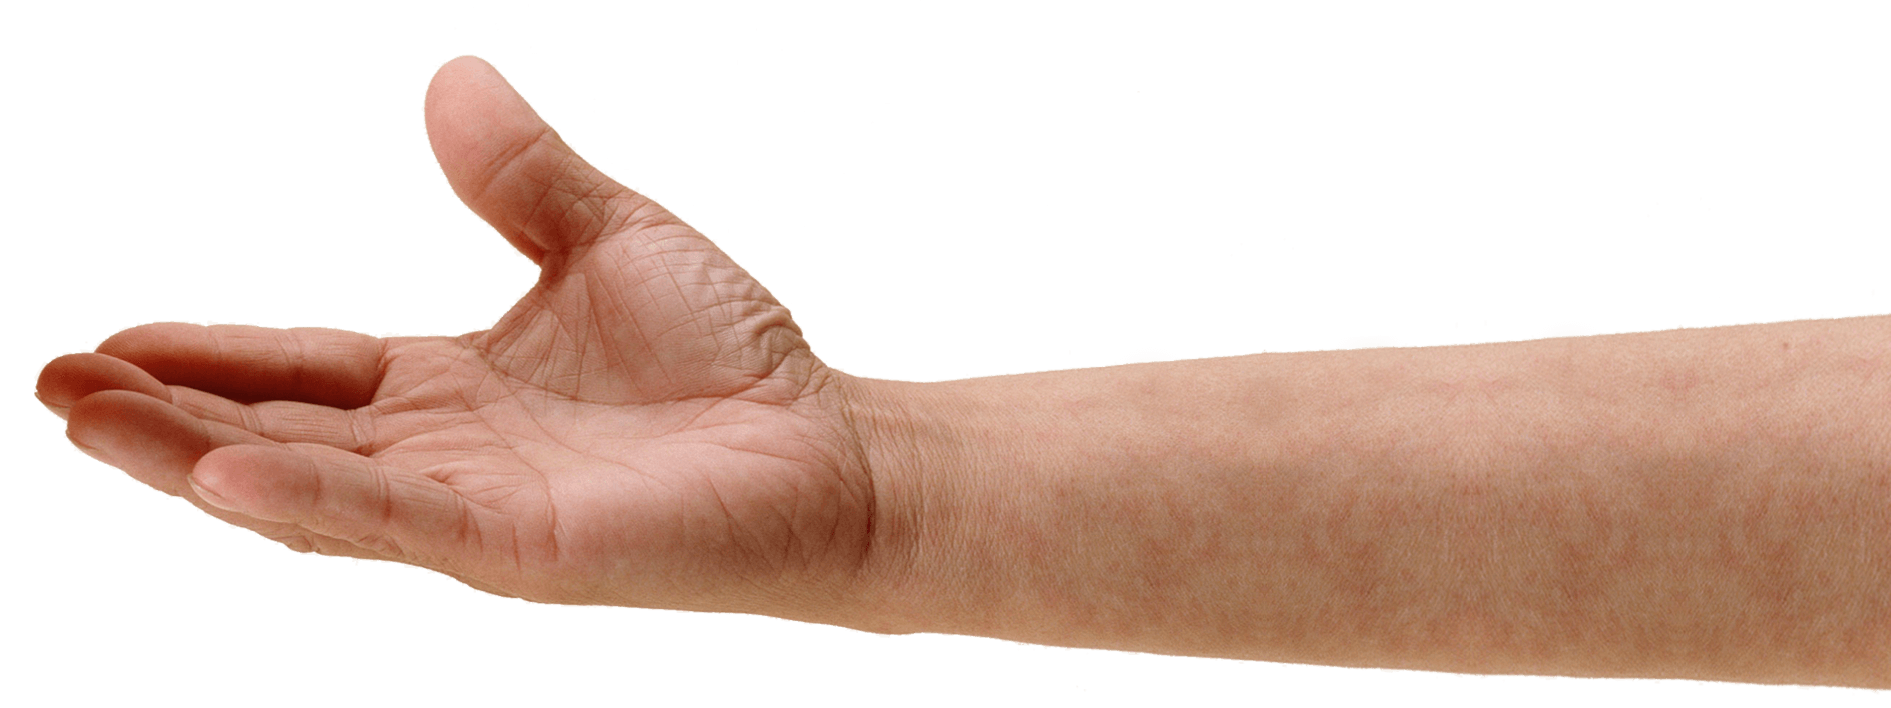 Hands Png Hand Image PNG Imag